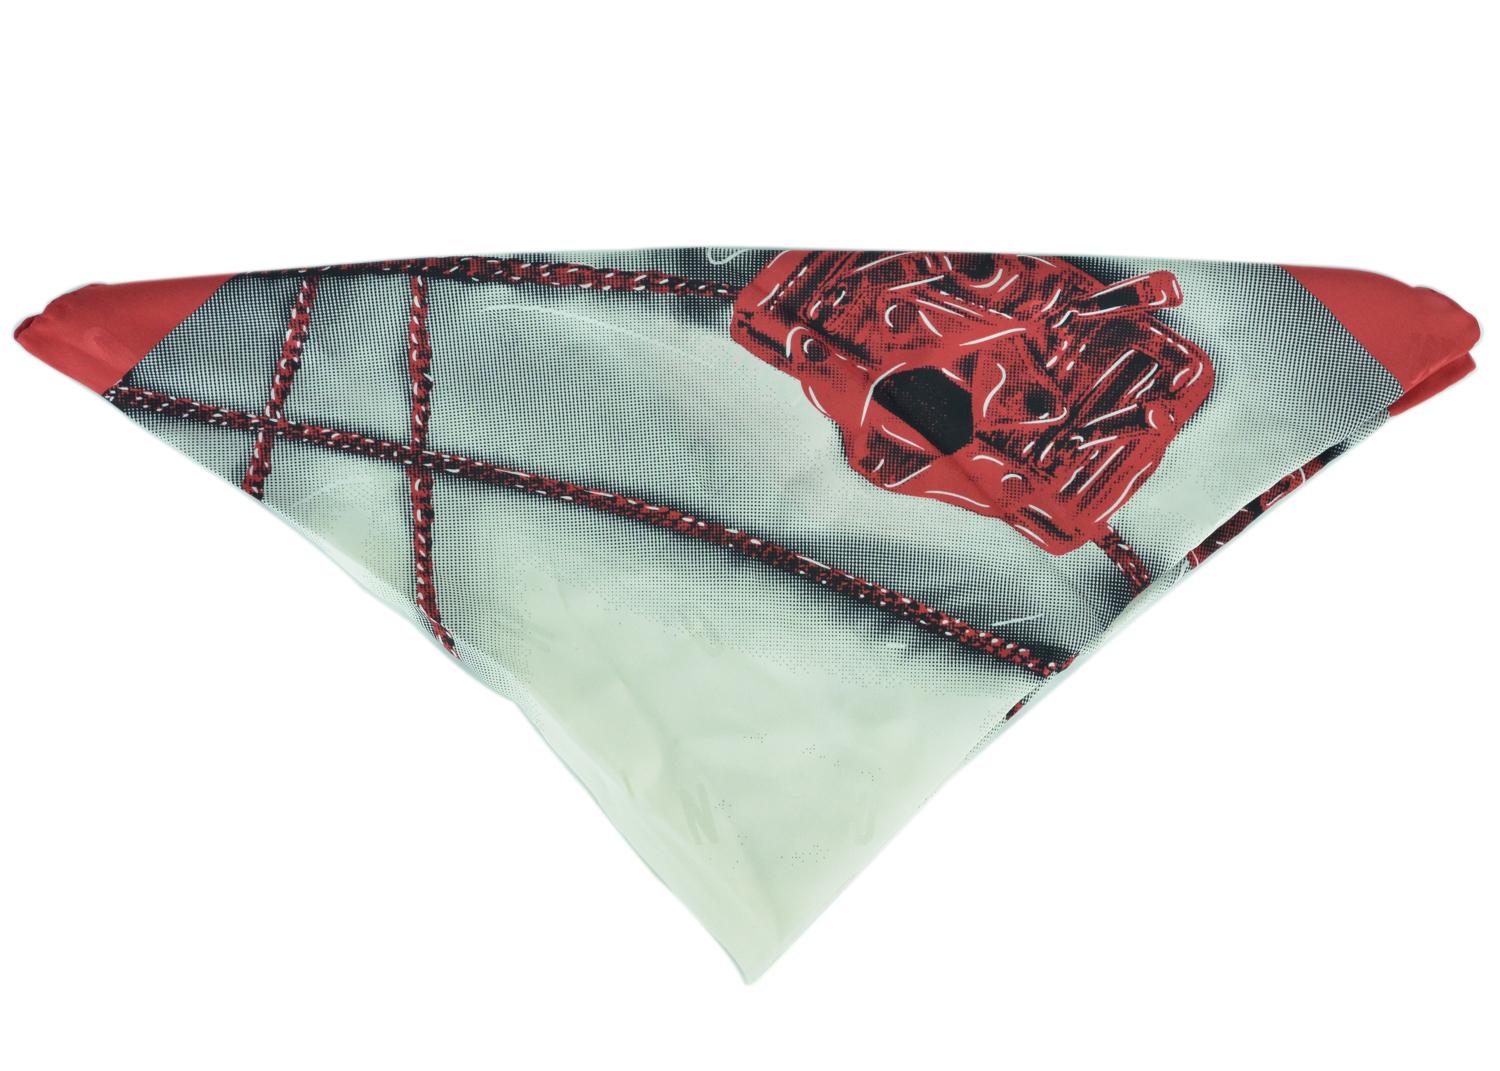 Moschino red printed scarf. This scarf is made from 100% silk for an ultra smooth and luxurious luster textile. The scarf features prints of chains and moschino moto jacket bags for an allover Moschino look. Pair with a white blouse for this scarf